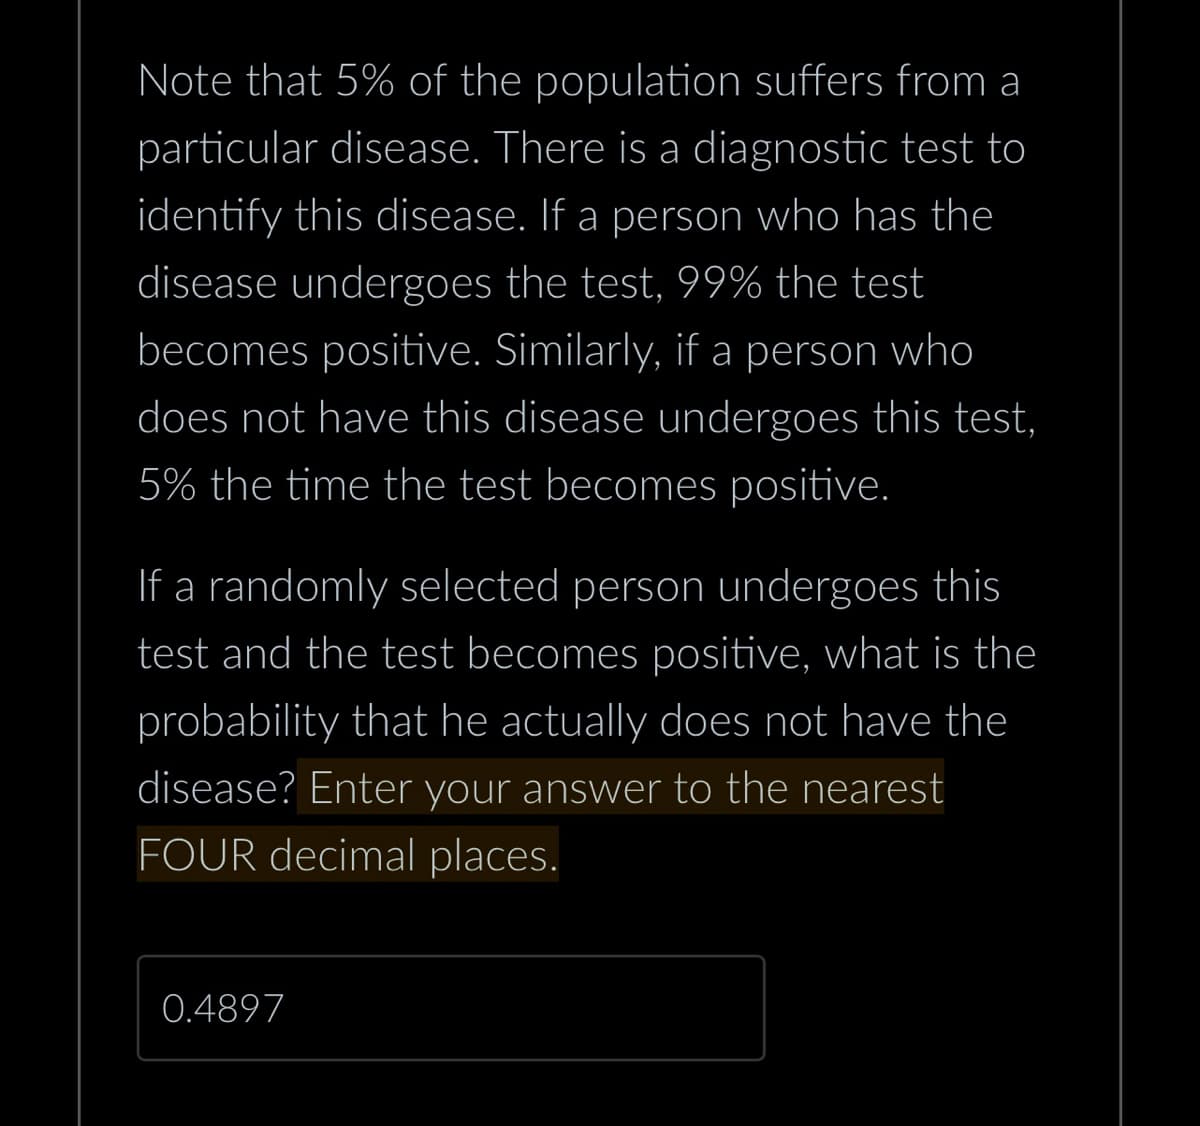 Note that 5% of the population suffers from a
particular disease. There is a diagnostic test to
identify this disease. If a person who has the
disease undergoes the test, 99% the test
becomes positive. Similarly, if a person who
does not have this disease undergoes this test,
5% the time the test becomes positive.
If a randomly selected person undergoes this
test and the test becomes positive, what is the
probability that he actually does not have the
disease? Enter your answer to the nearest
FOUR decimal places.
0.4897